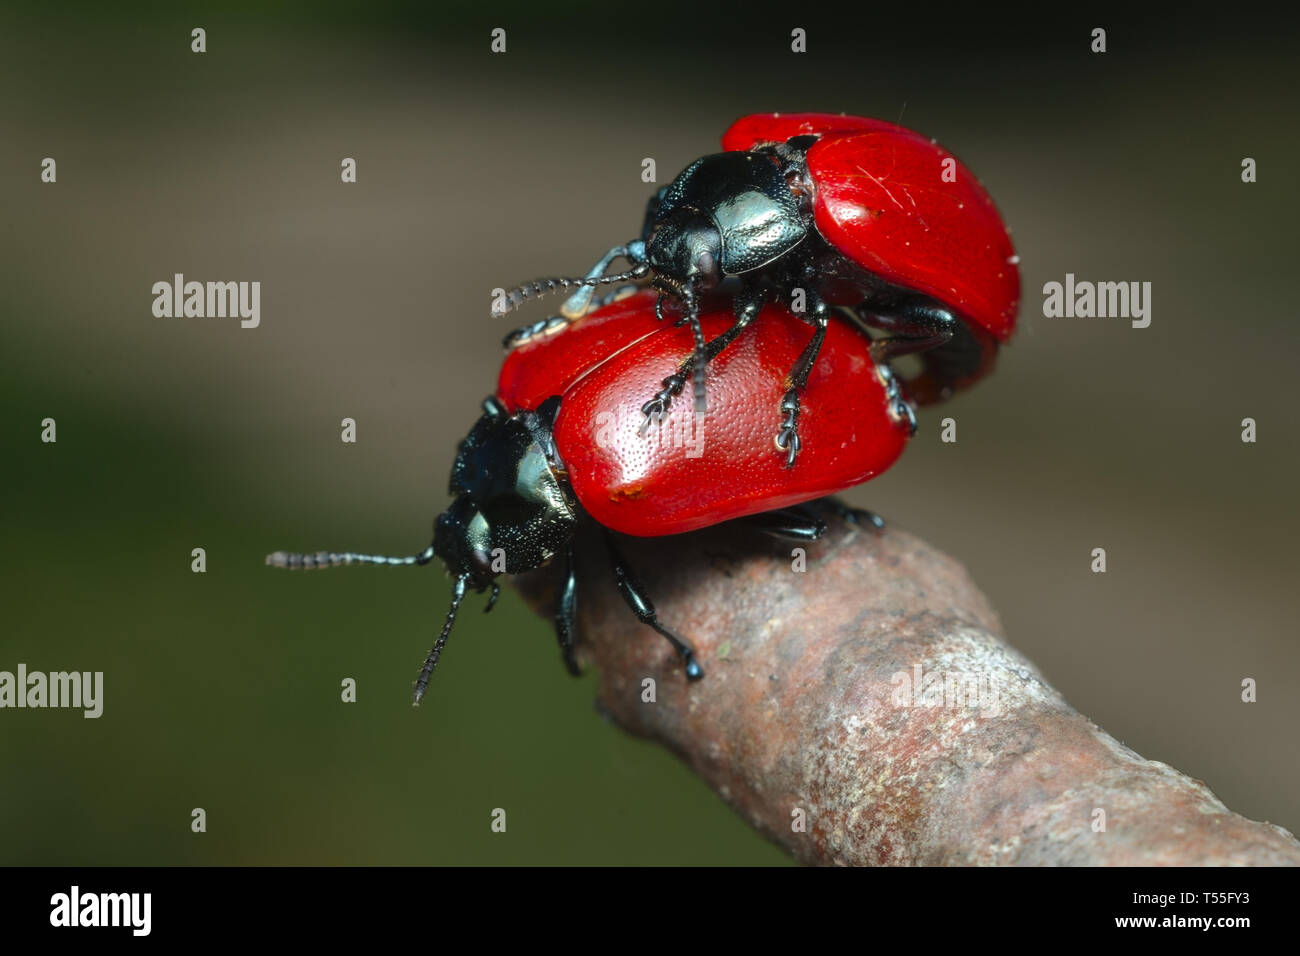 Adults of red leaf beetle (Chrysomela populi) mating Stock Photo